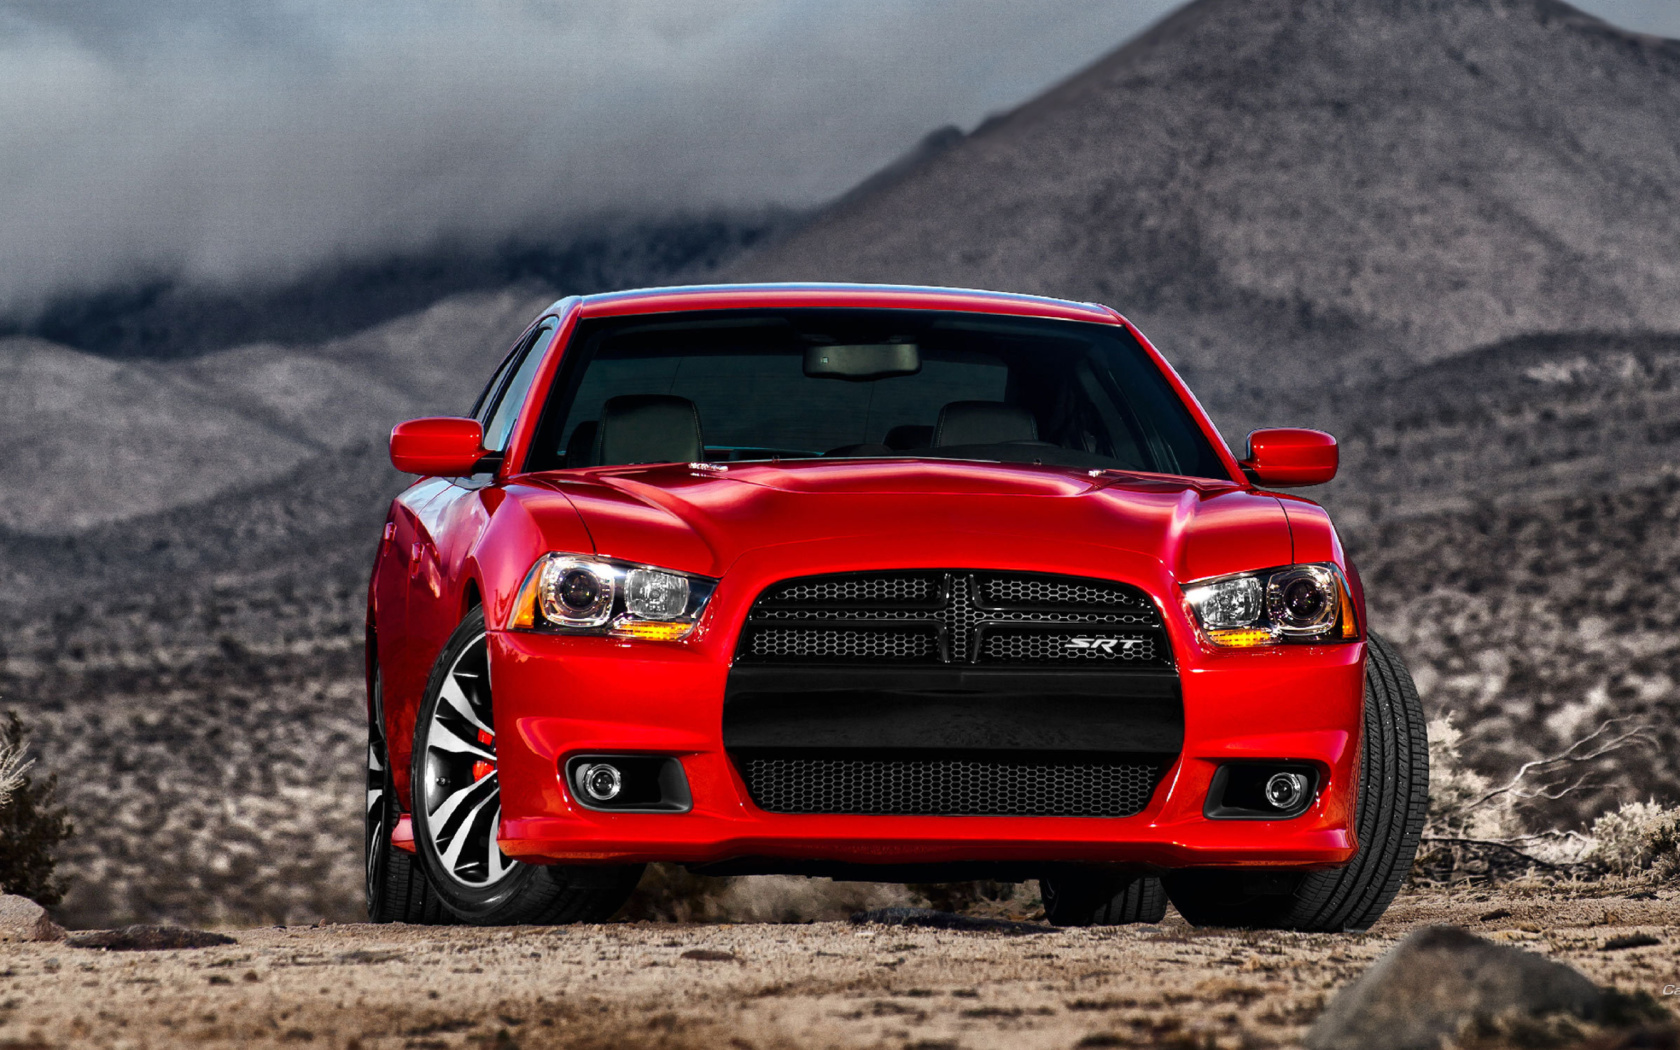 2015 Dodge Charger wallpaper 1680x1050